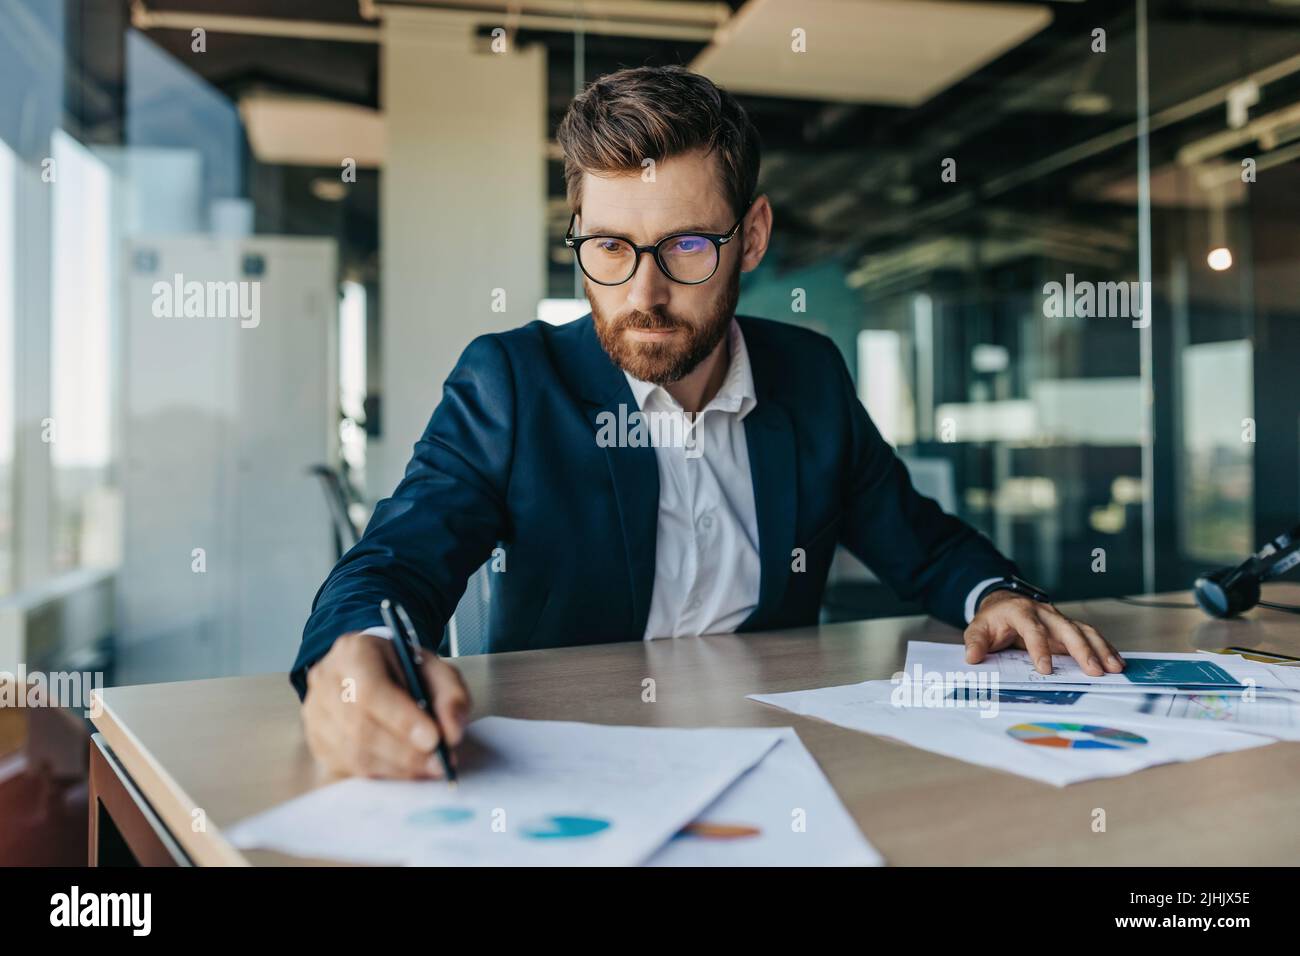 Concentrated handsome businessman in glasses working with documents in office interior, checking and signing papers Stock Photo